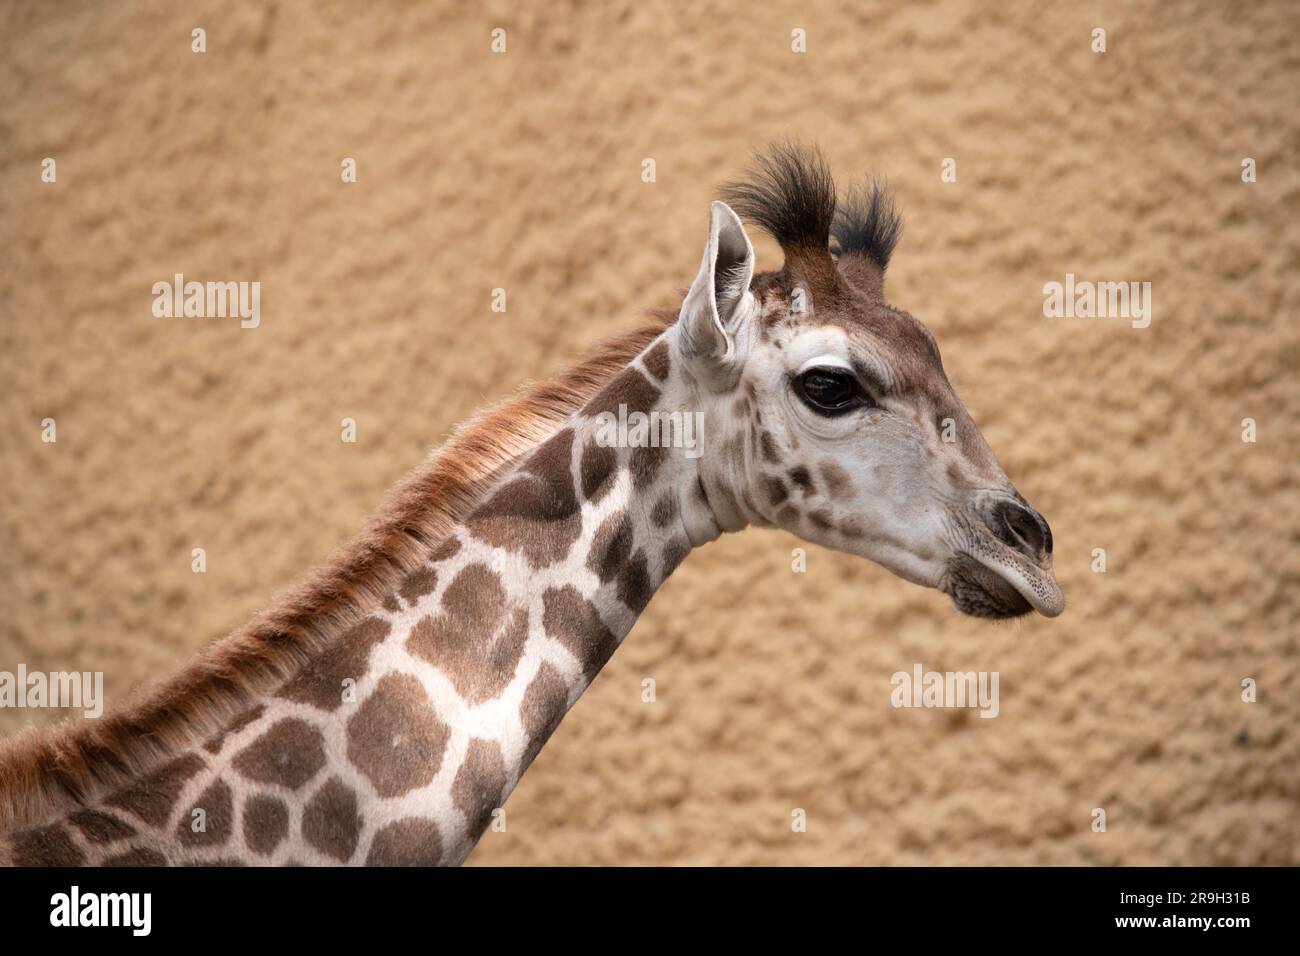 The giraffe is the tallest of all mammals. The legs and neck are extremely long. The giraffe has a short body, a tufted tail, a short mane, and short Stock Photo